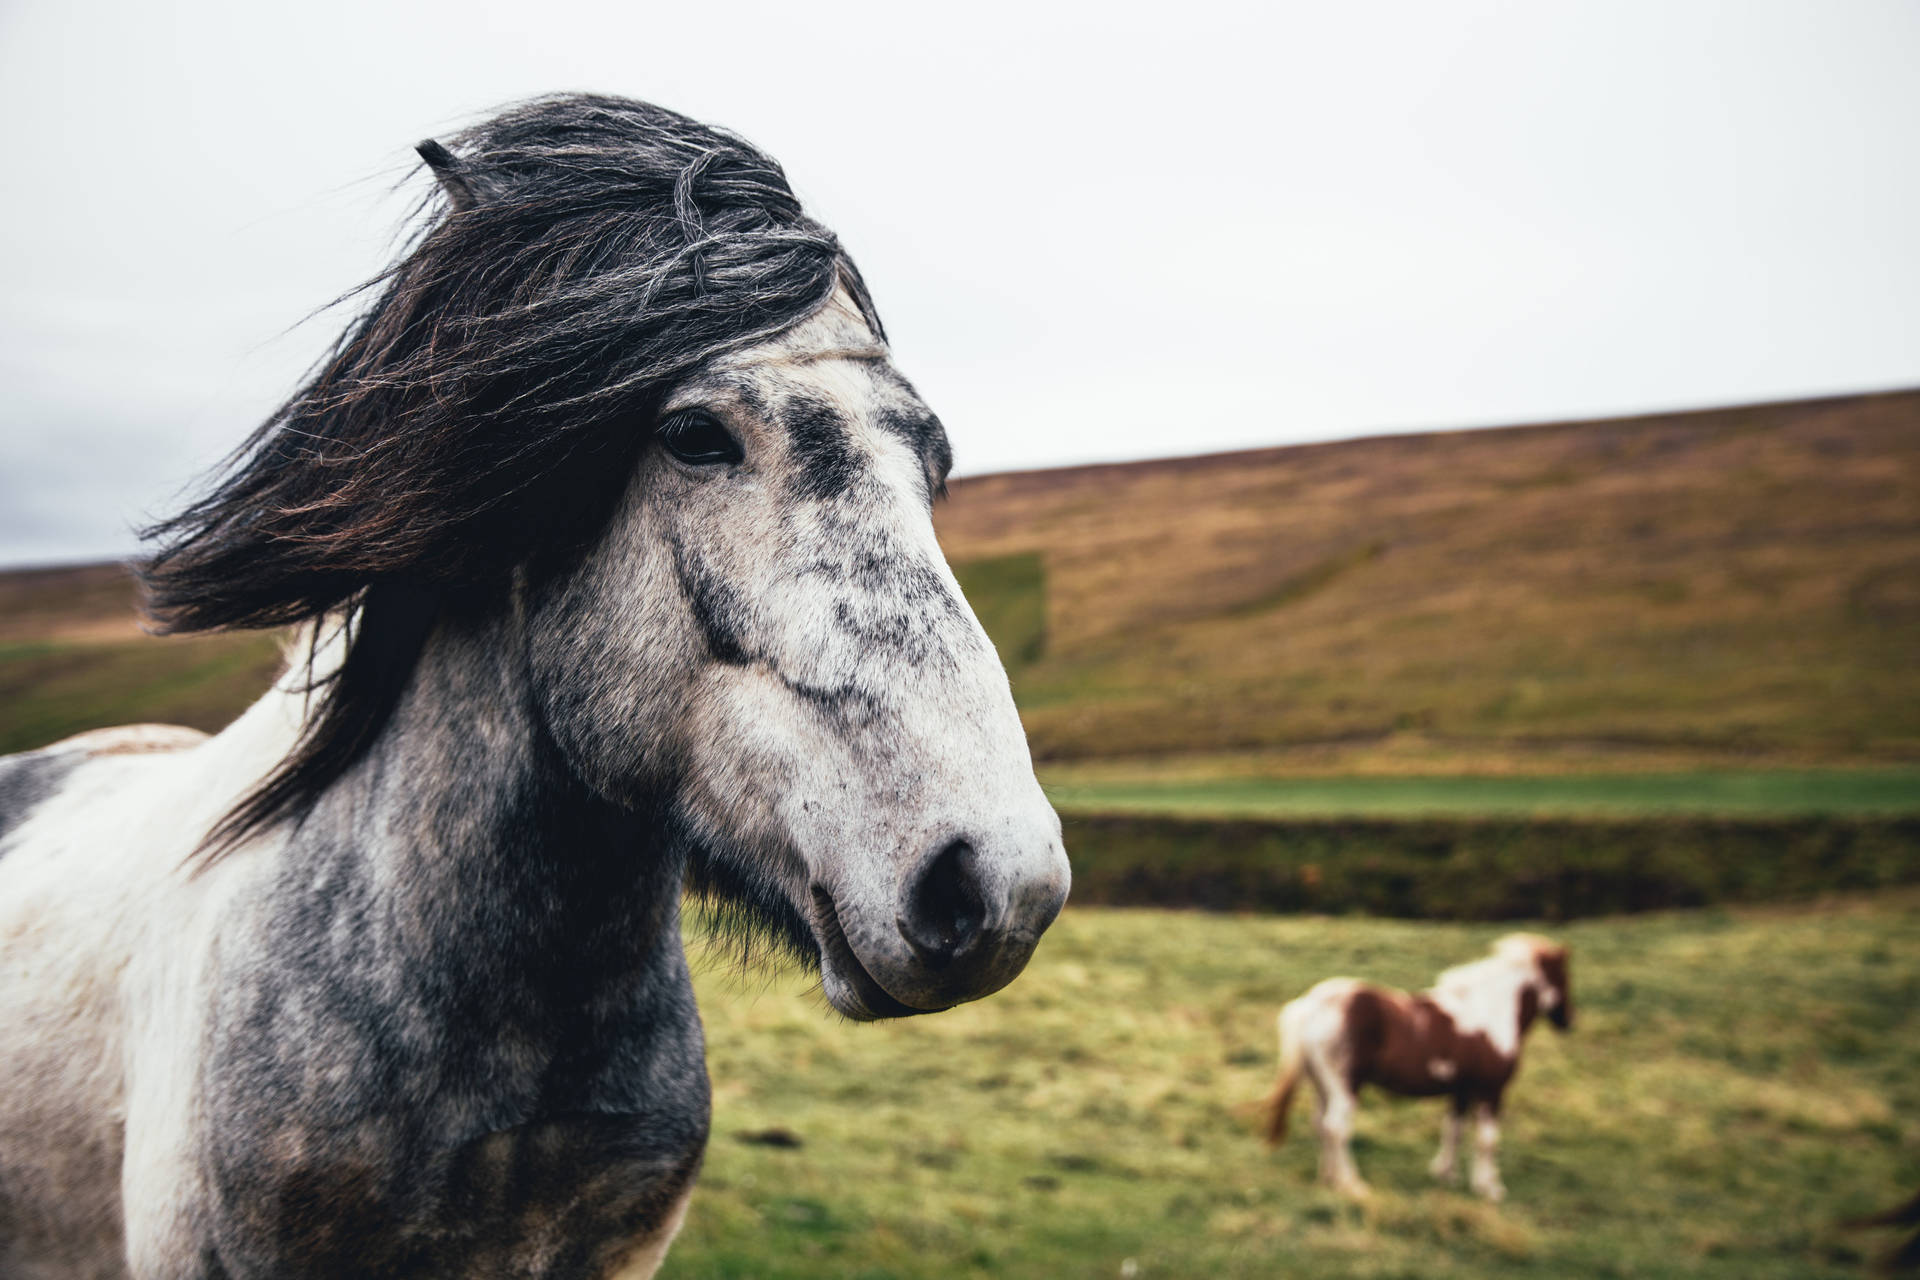 A Horse Trots Through The Windy Countryside